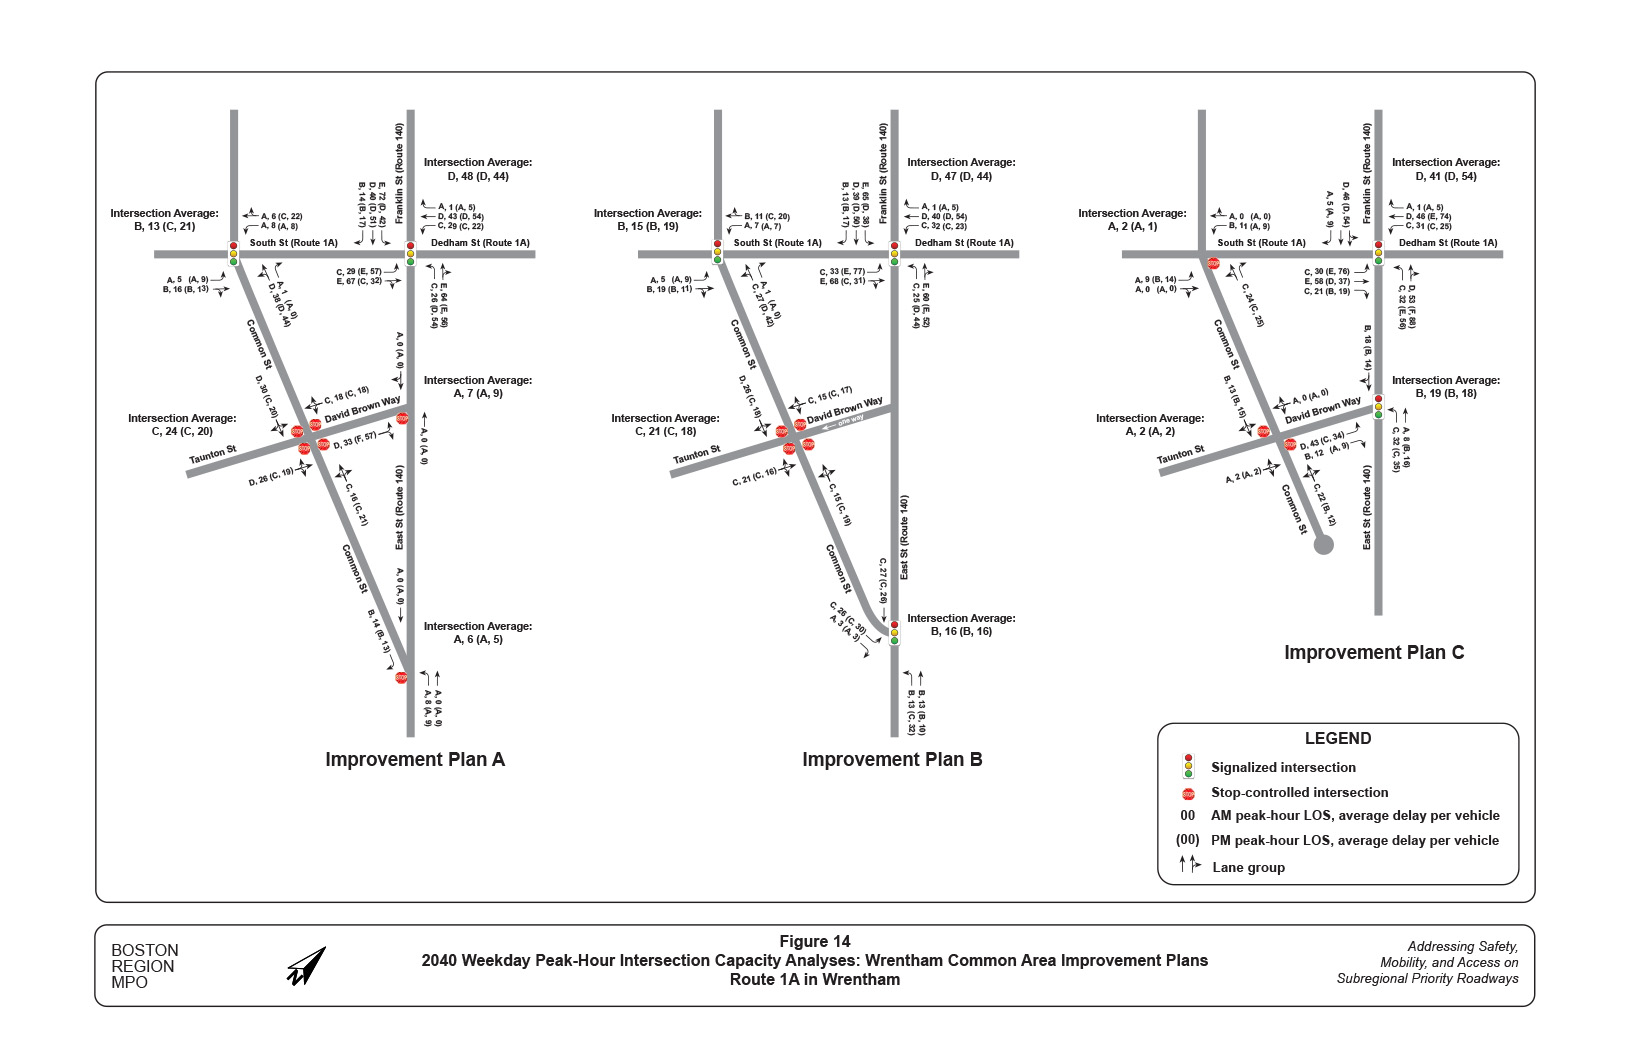 Figure 14 contains three diagrams that provide weekday level of service and average delay per vehicle, projected to the year 2040, for the three Wrentham Common Area Improvement Plans.